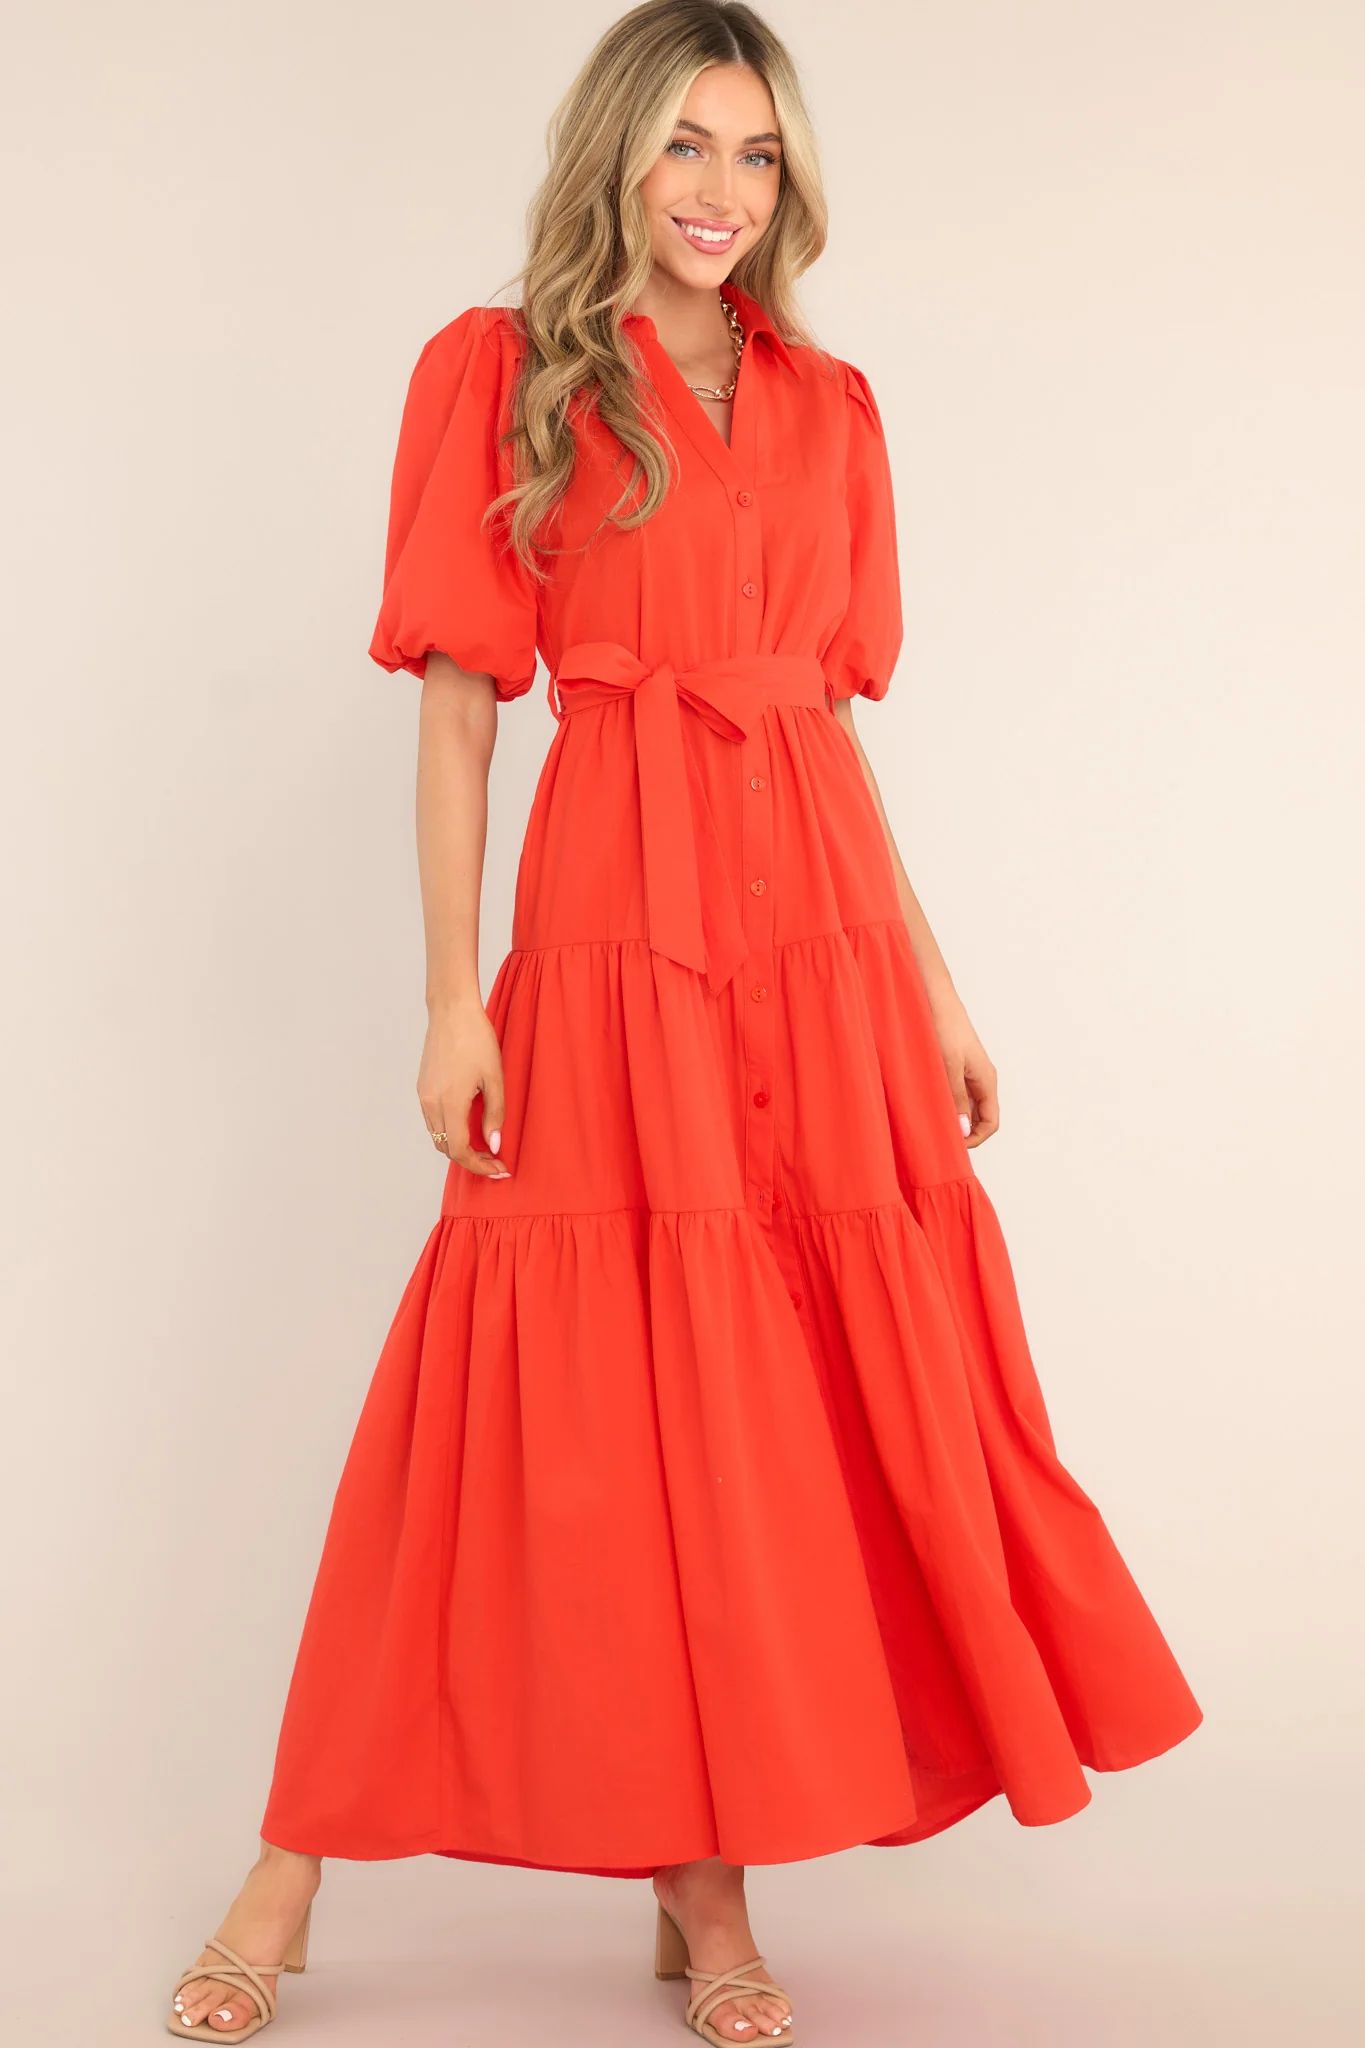 Eternal Flame Red Button Front Maxi Dress, Memorial Day Outfit, July 4th Dress | Red Dress 